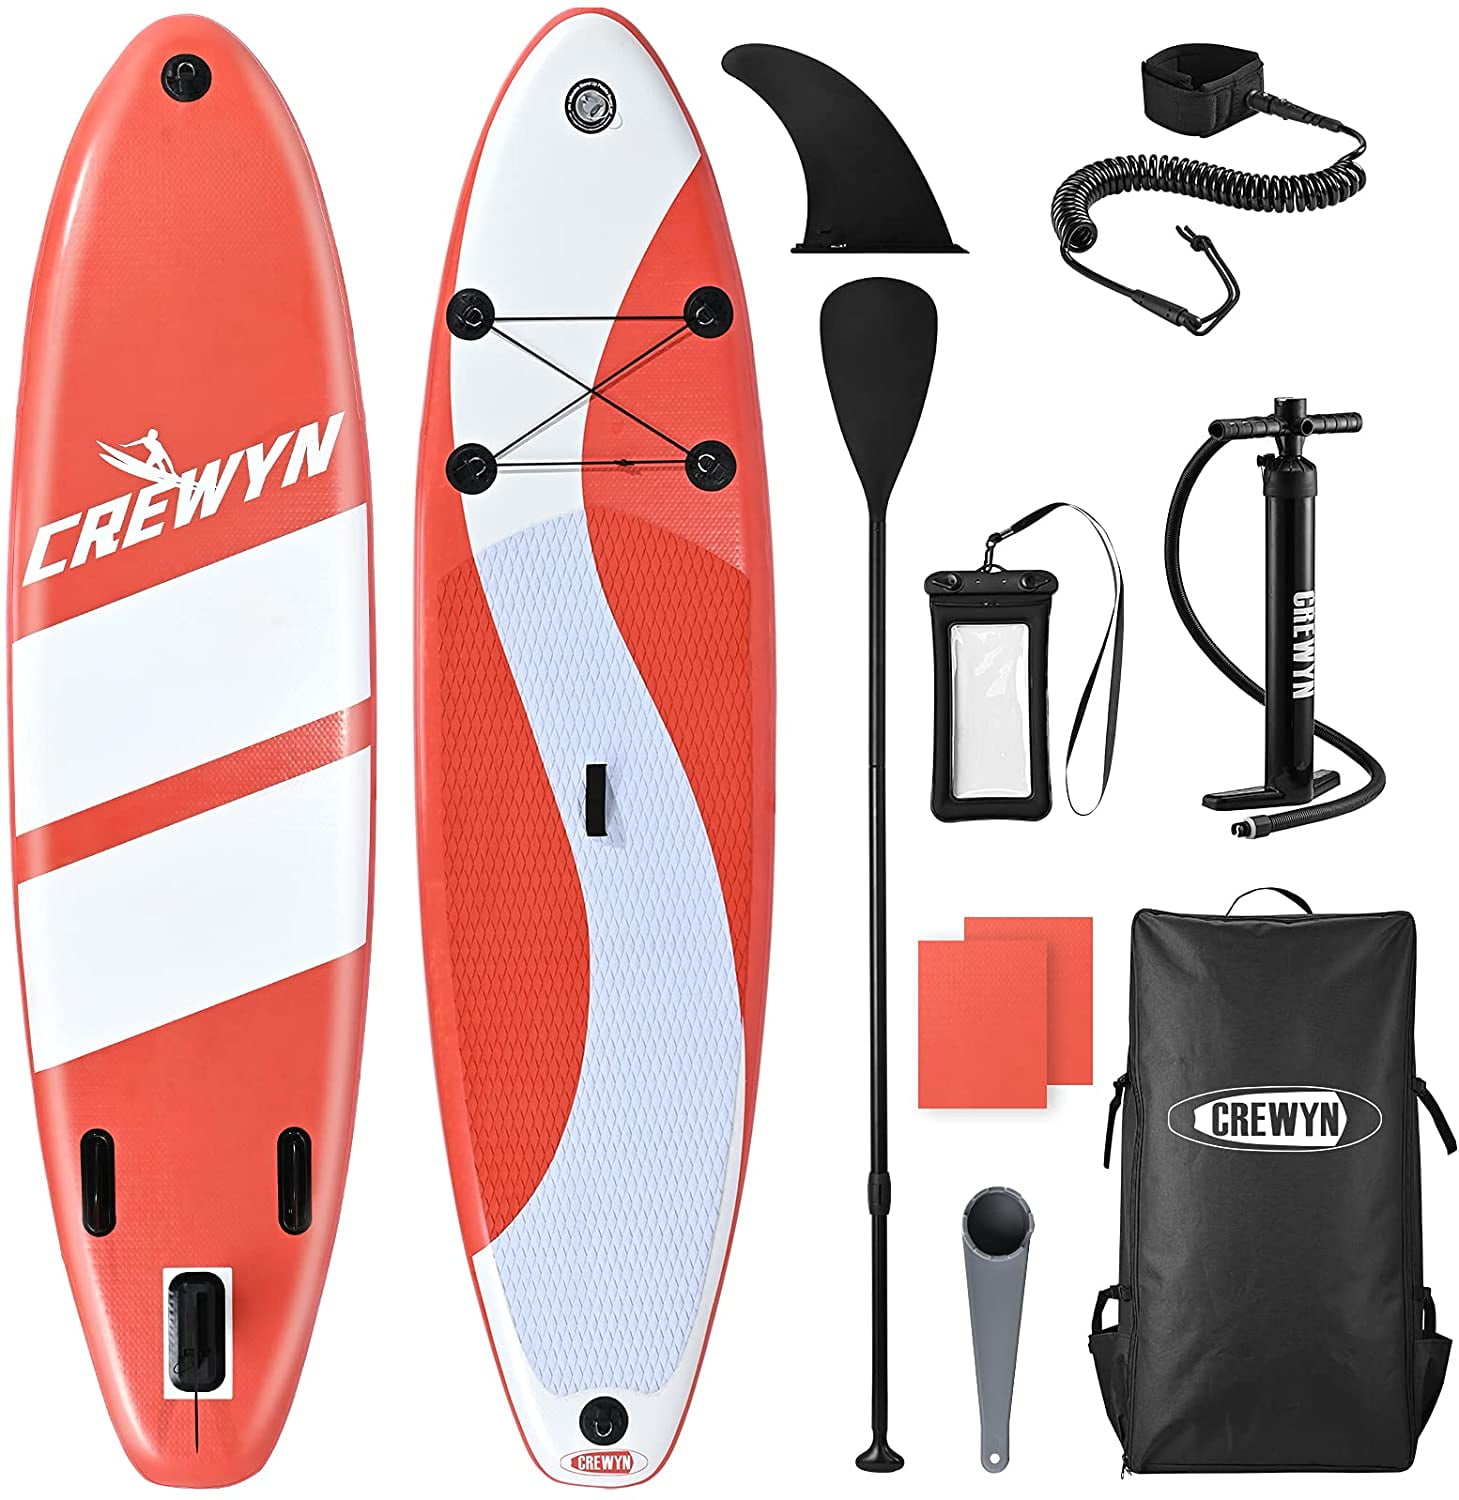 CREWYN Inflatable Stand Up Paddle Board 10x30x6 Lightweight Paddle Board with SUP Accessories Hand Pump 3 Bottom Fin for Surf Control & Backpack ISUP for Adults Youth Wide Stance Non-Slip Deck 